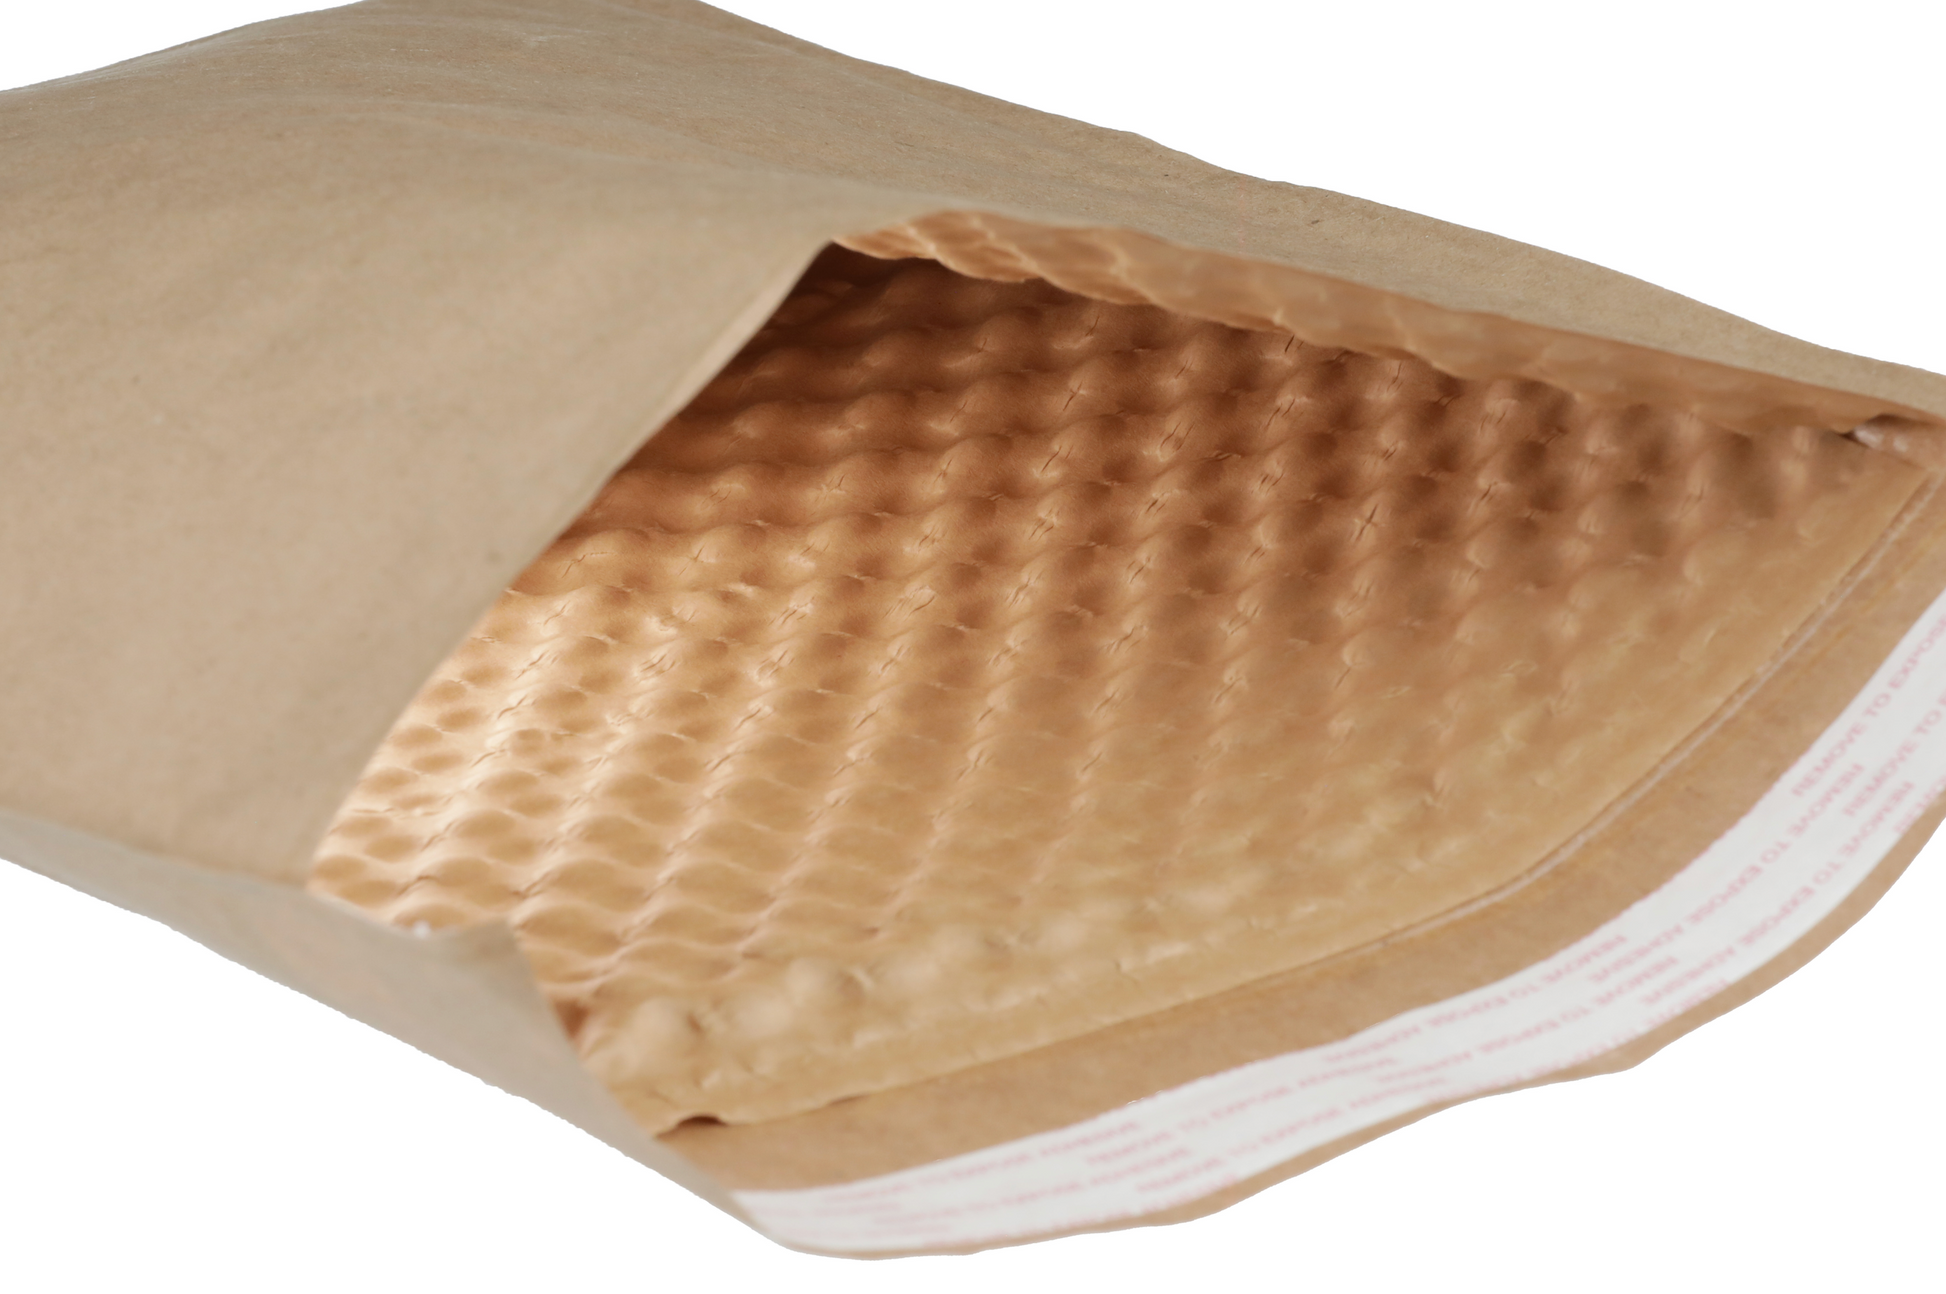 BUBBLE WRAP® Brand Packaging Solutions from Sealed Air